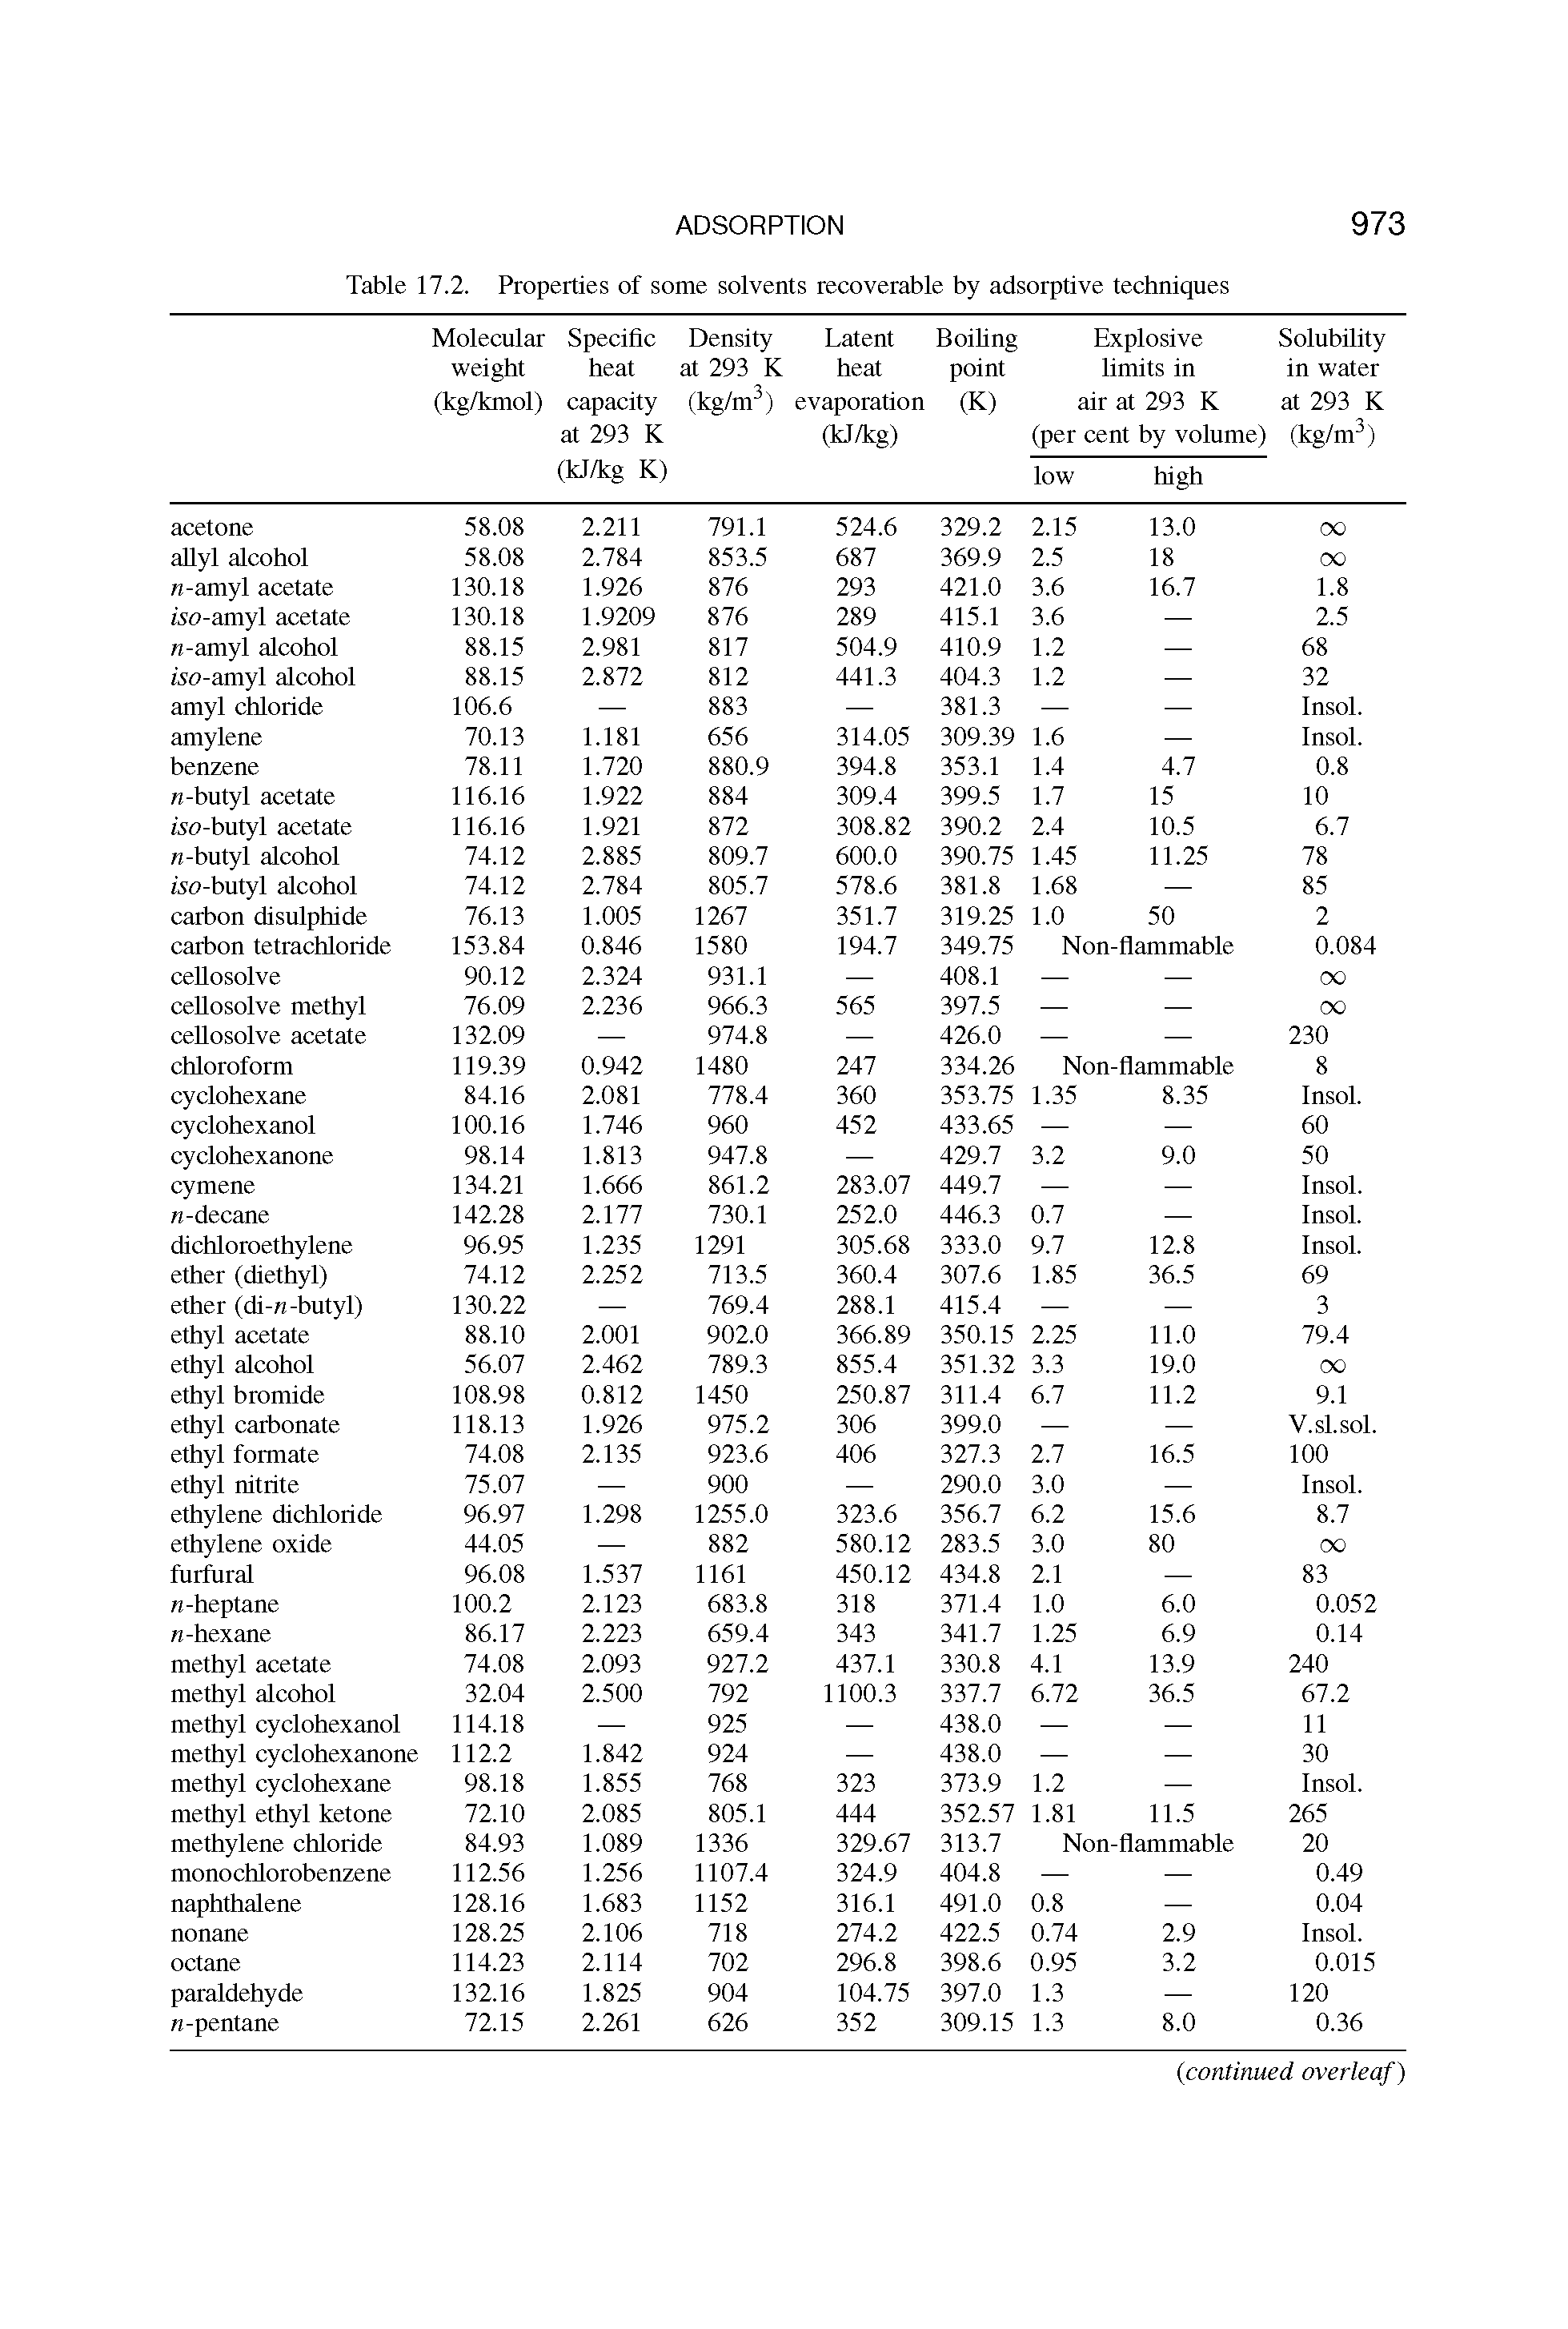 Table 17.2. Properties of some solvents recoverable by adsorptive techniques...